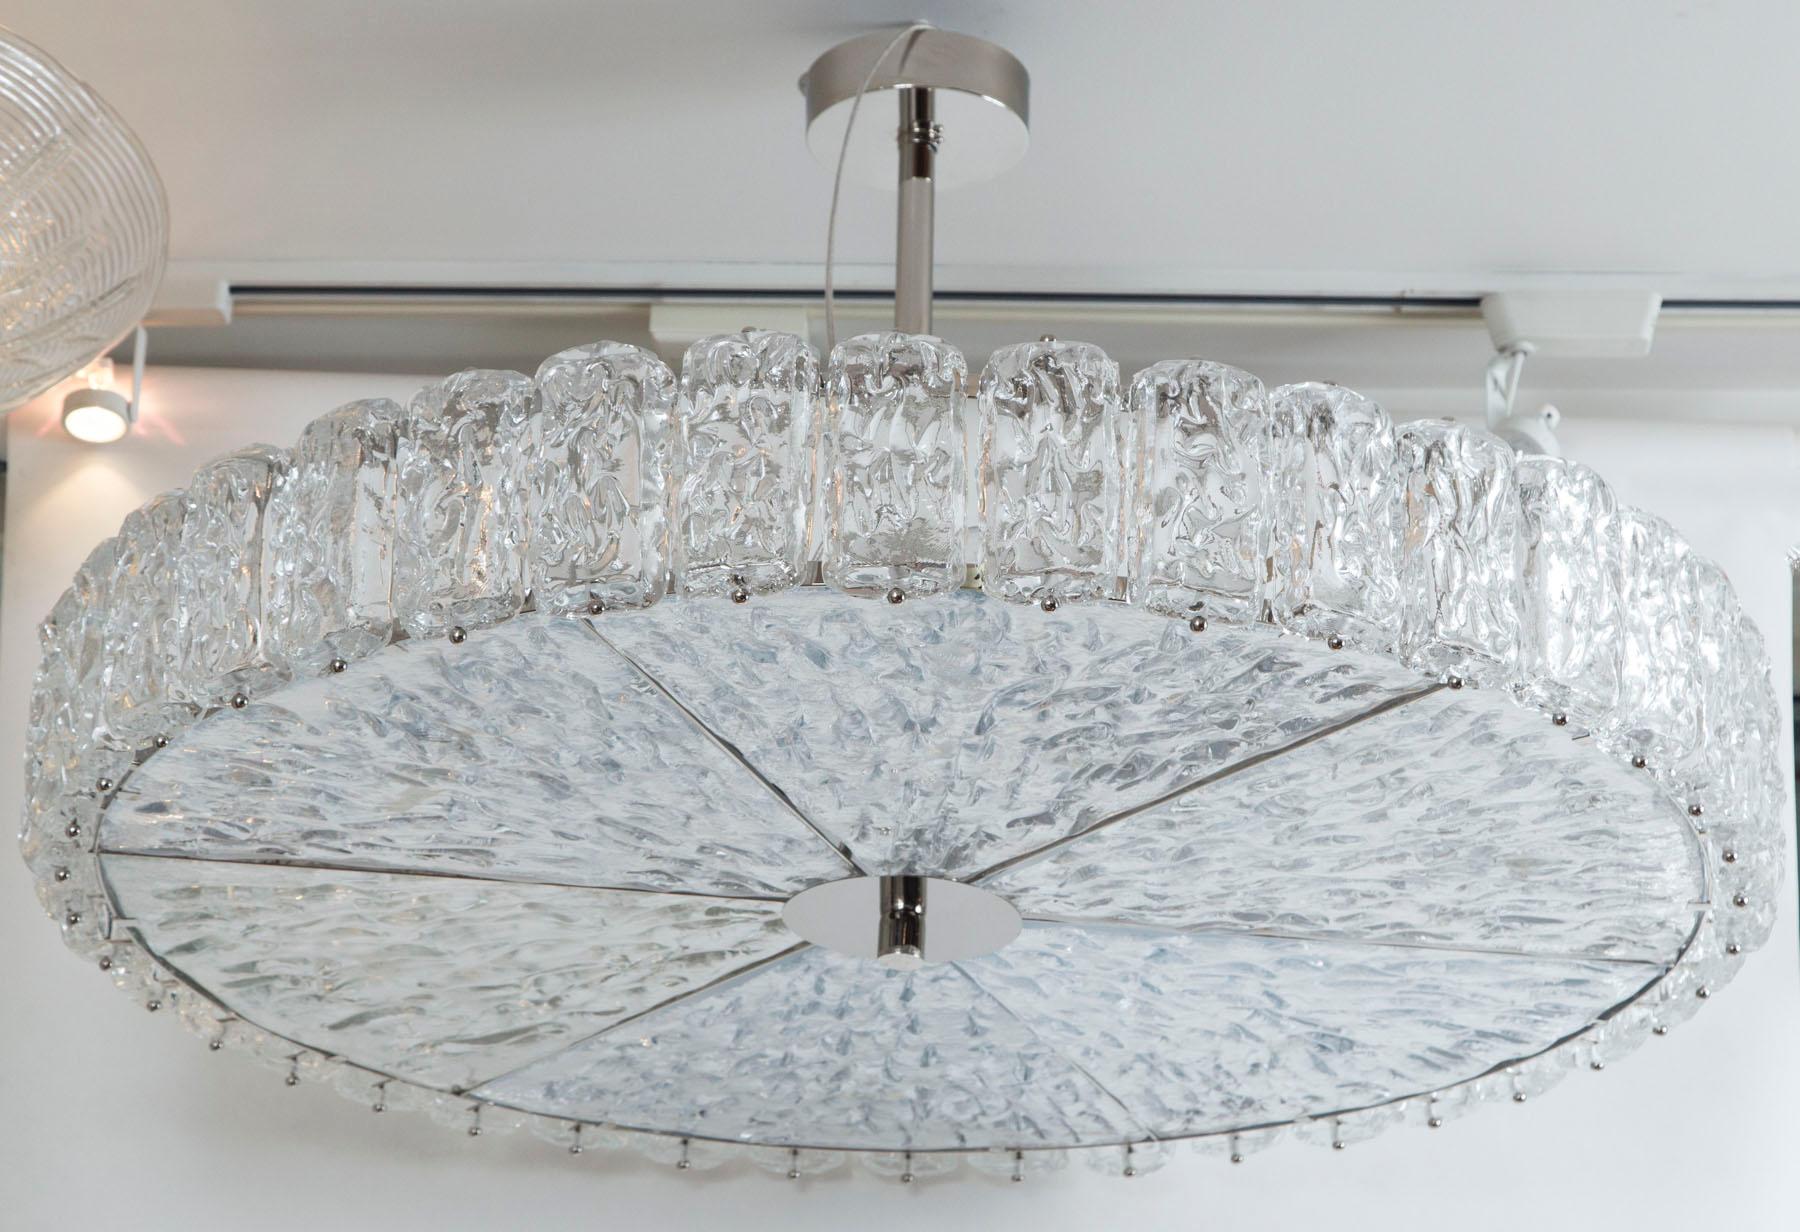 This shimmery nickel-ed ceiling fixture blown to appear as if constructed from blocks of ice is comprised of 46 separate glass pieces and is set into a nickel frame and electrified to code with 6 medium base sockets for even illumination. UL